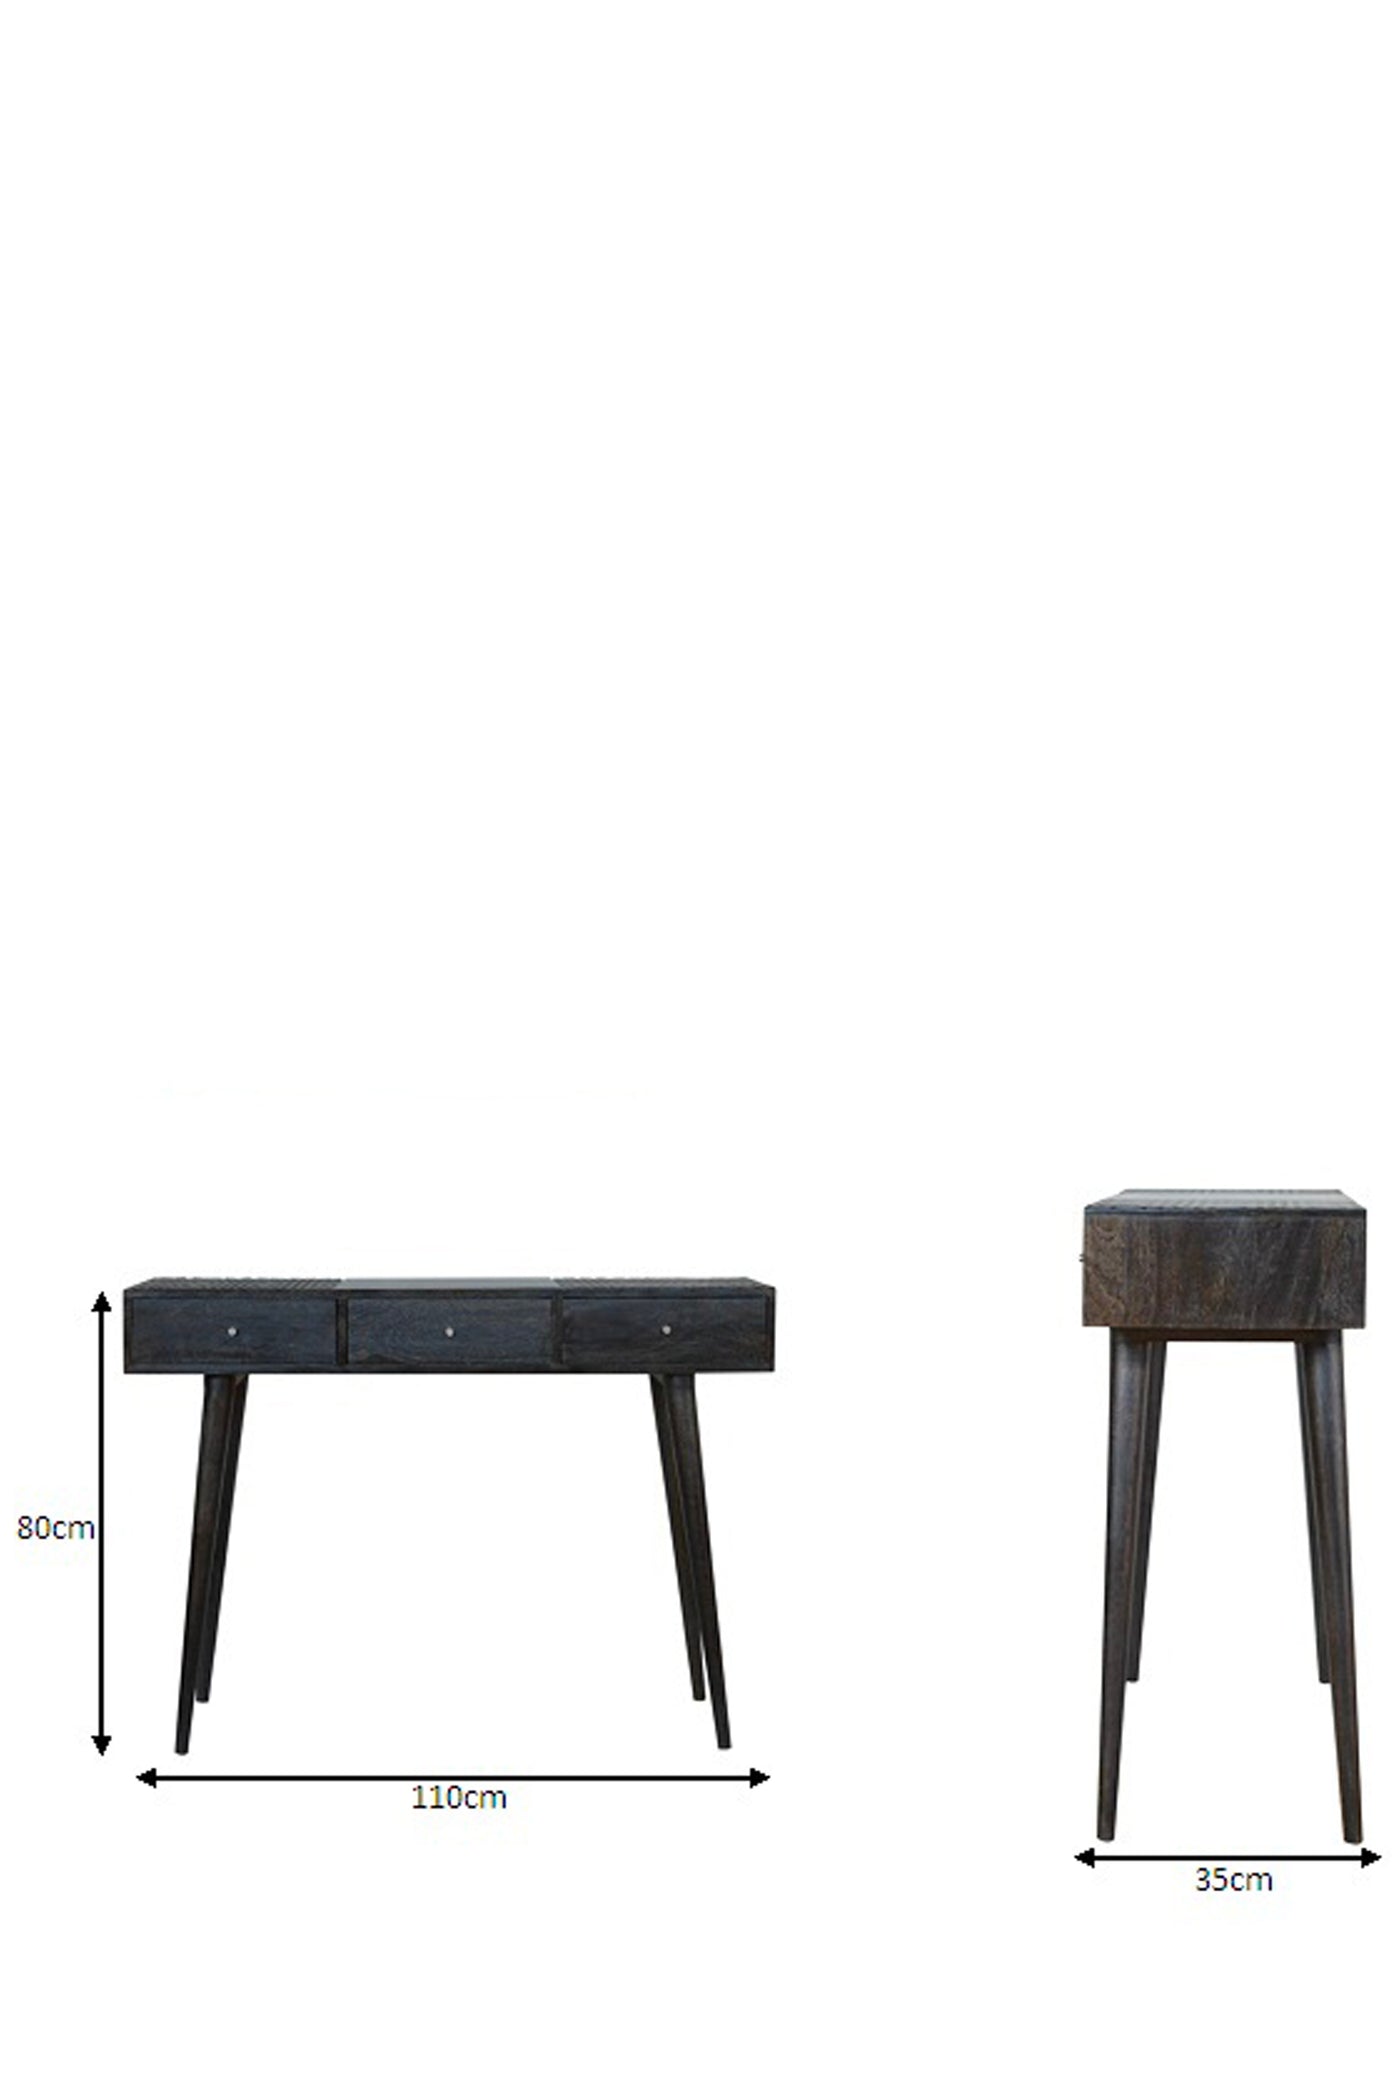 Boden - Console Table